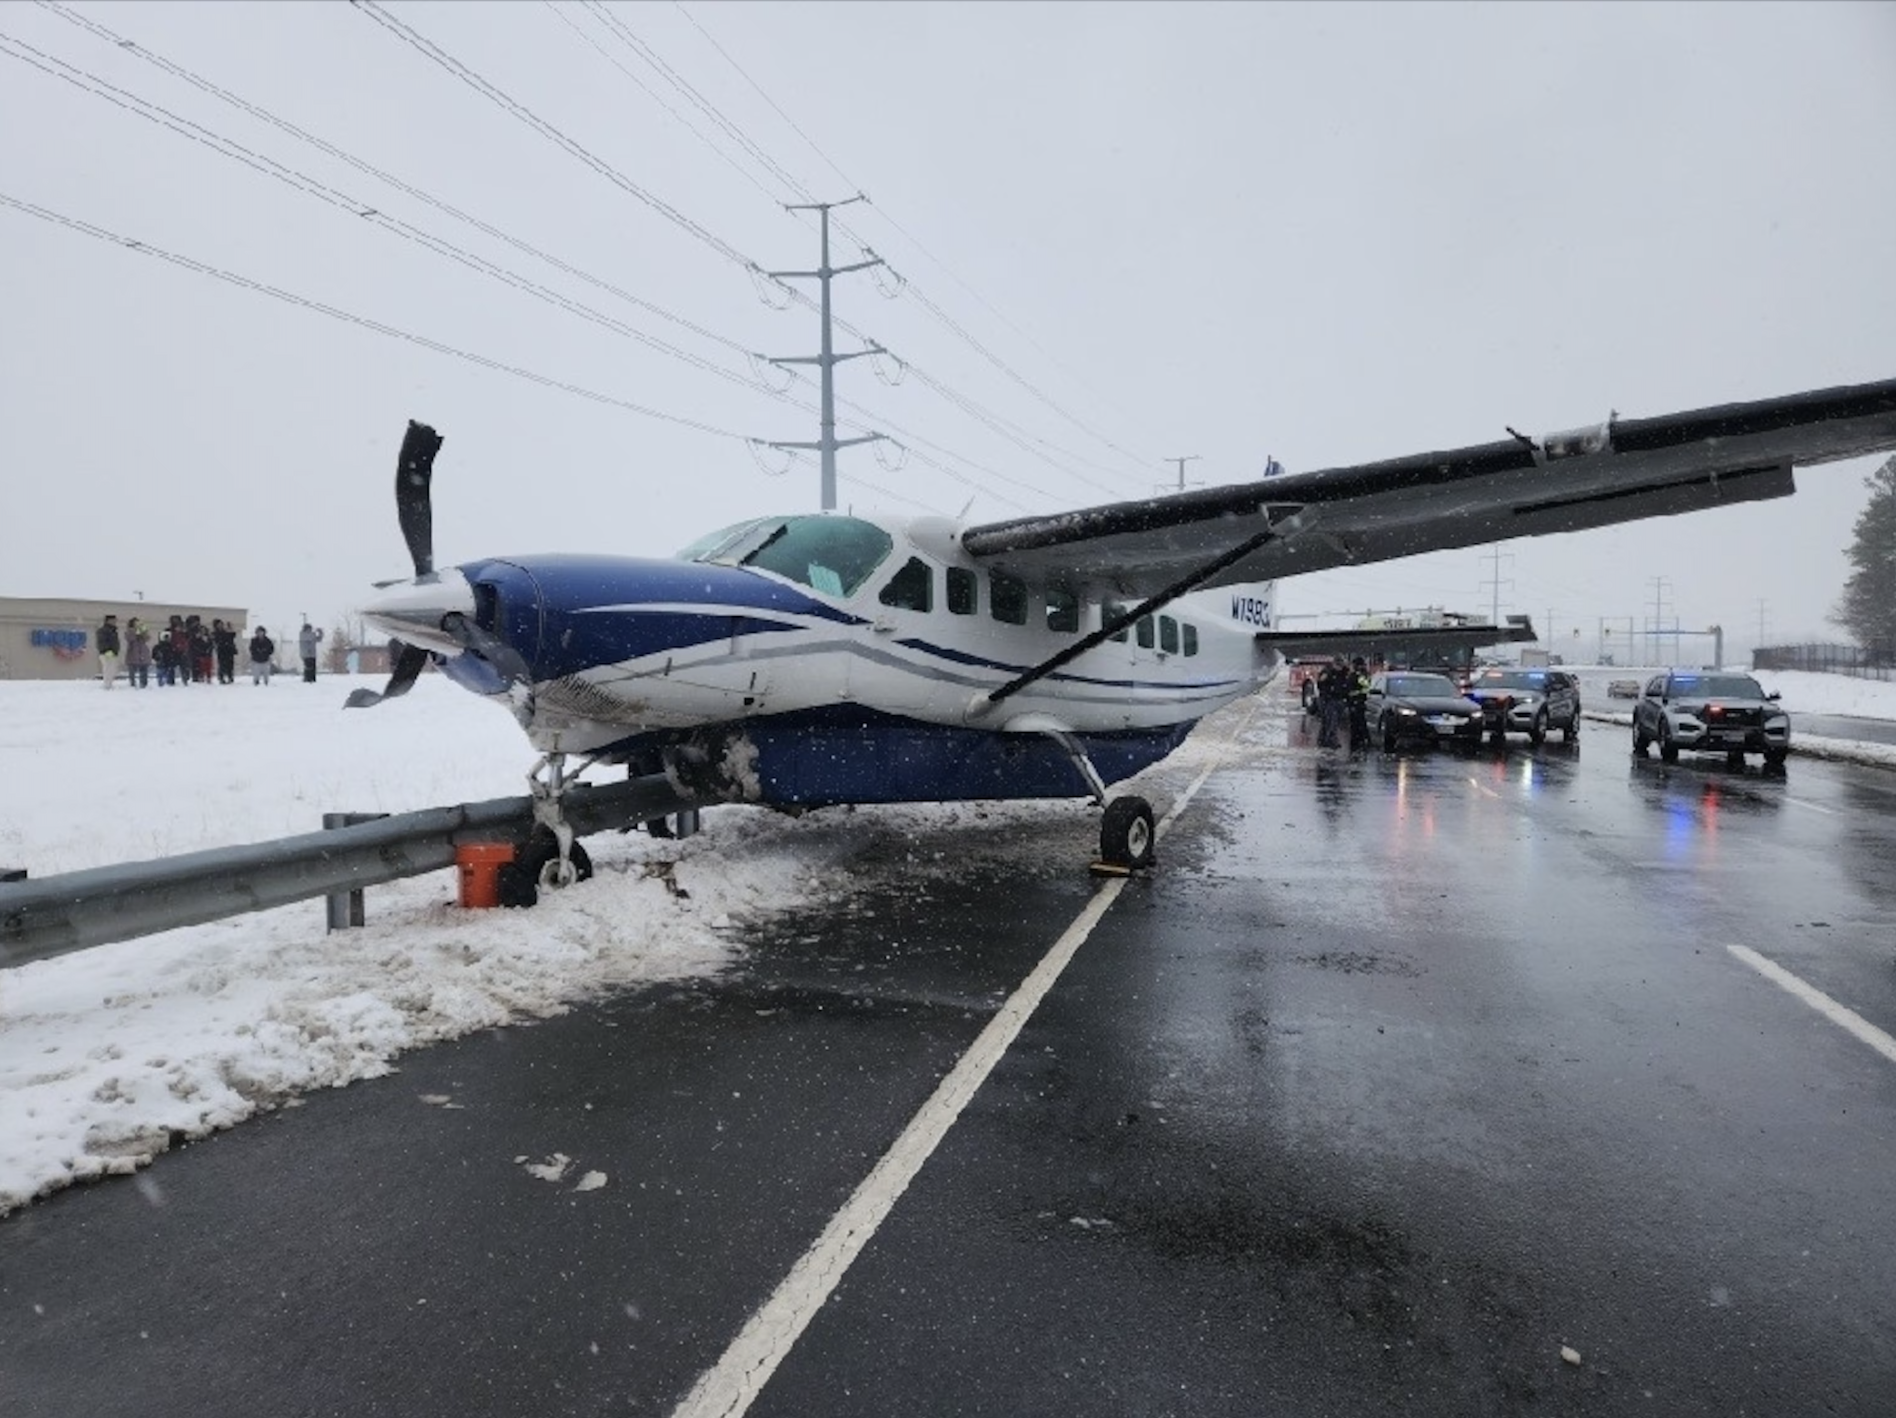 A plane made a "hard landing" on a highway in Virginia with 7 passengers on board